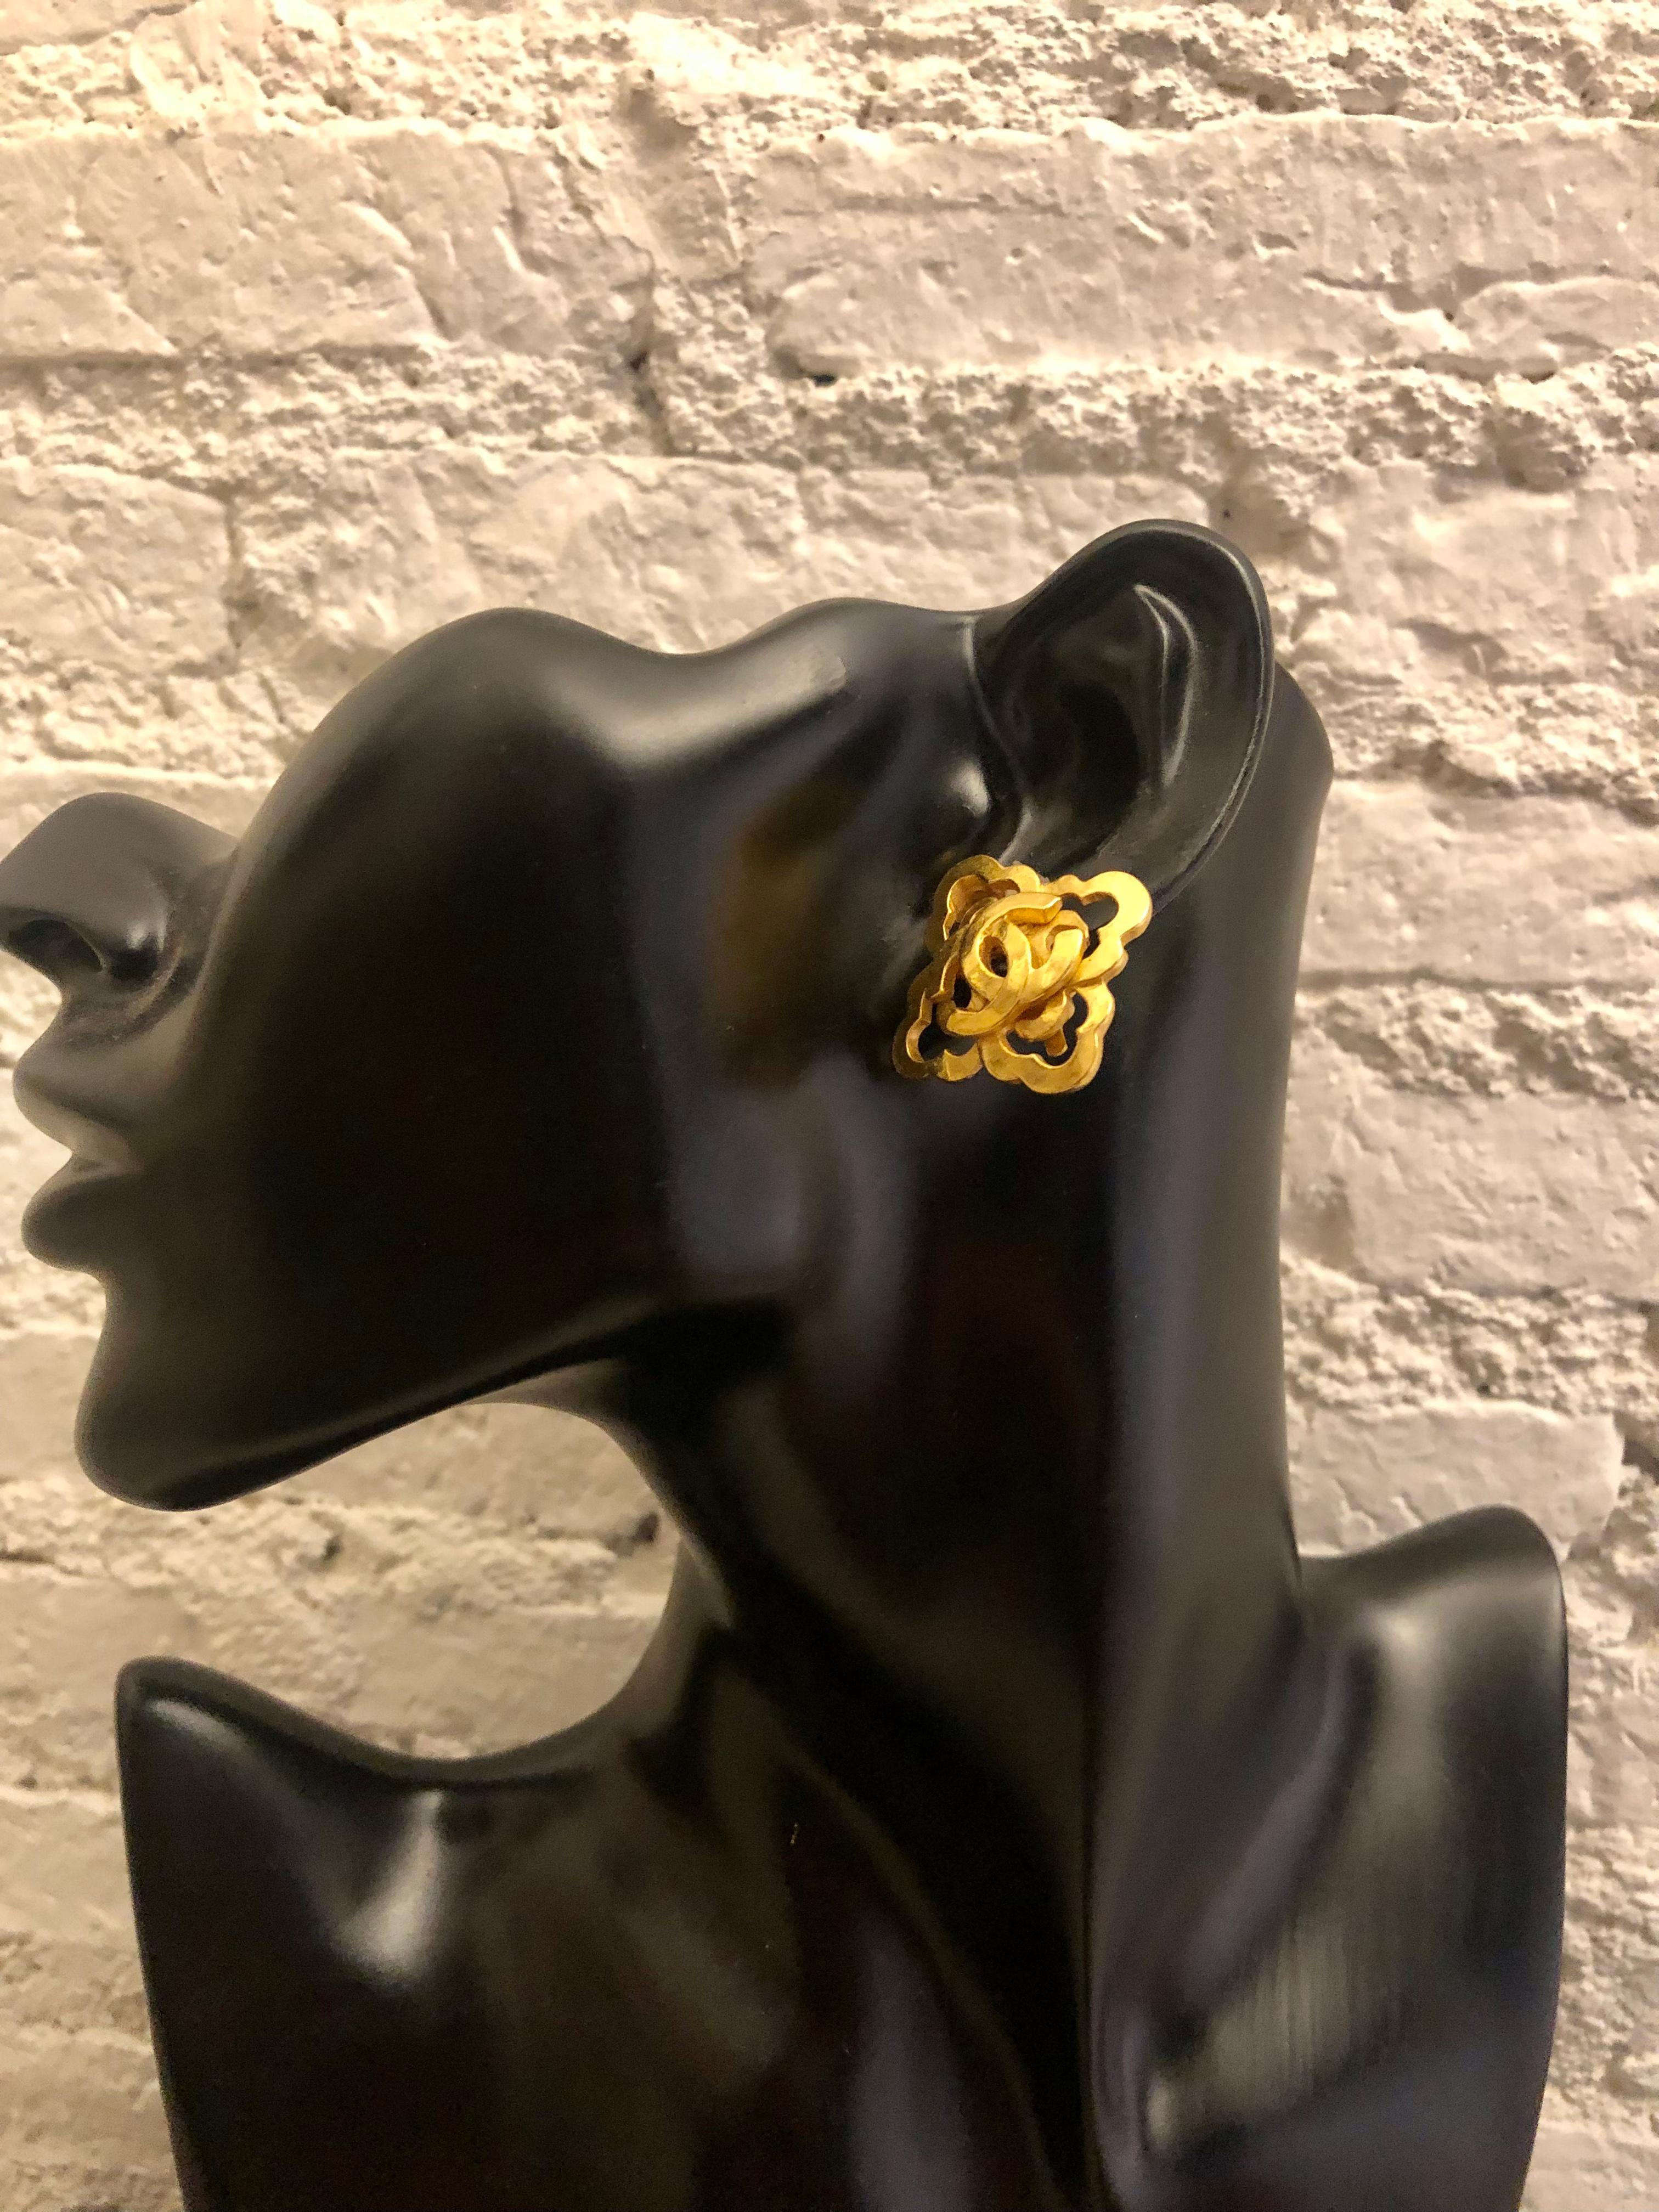 These Vintage CHANEL clip-on earrings are crafted of gold plated cloverleaf adorned with CC logo in the center. Stamped CHANEL 97A made in France. Diameter measures approximately 2.8 cm. Come with box. 

Condition - Excellent vintage condition with